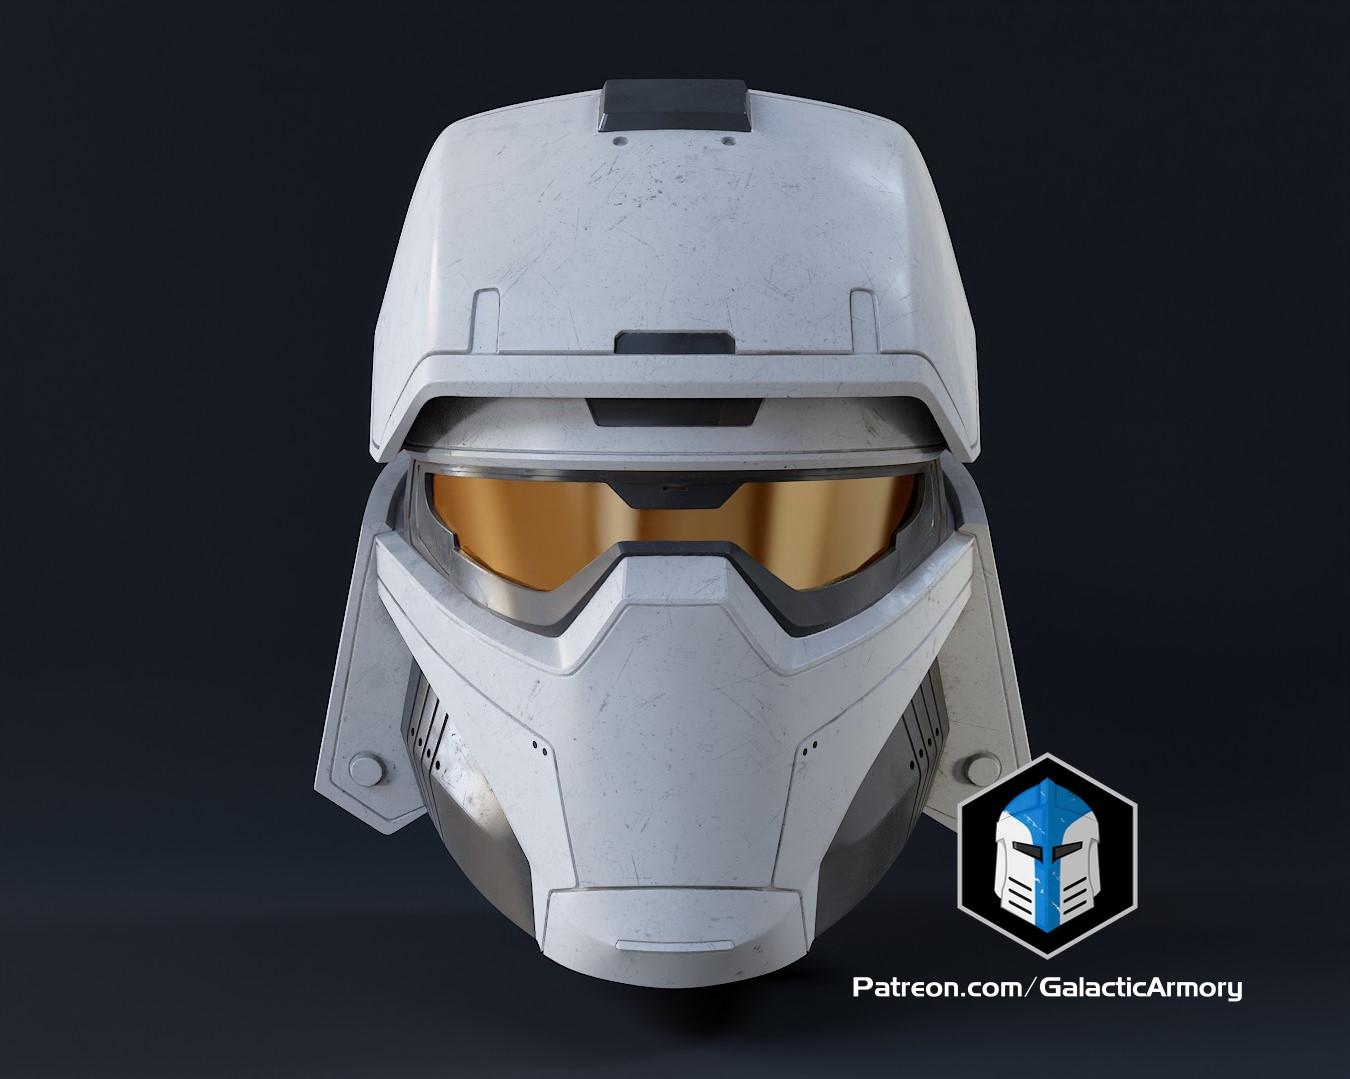 [New Files! The Snowtrooper Spartan custom helmet has been added to the February Specialist rewards!